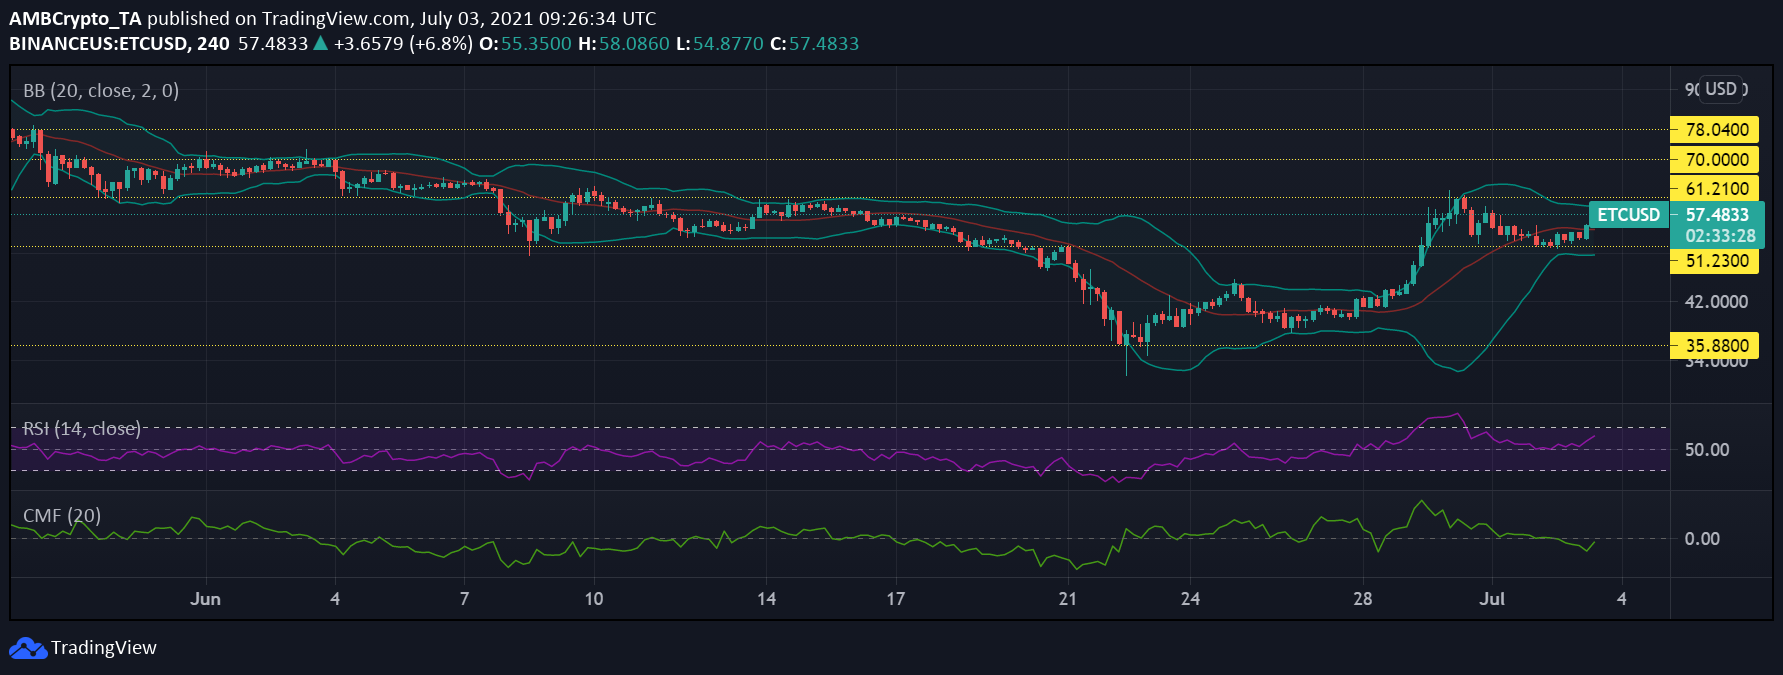 EOS, Ethereum Classic and MATIC Price Analysis: July 3